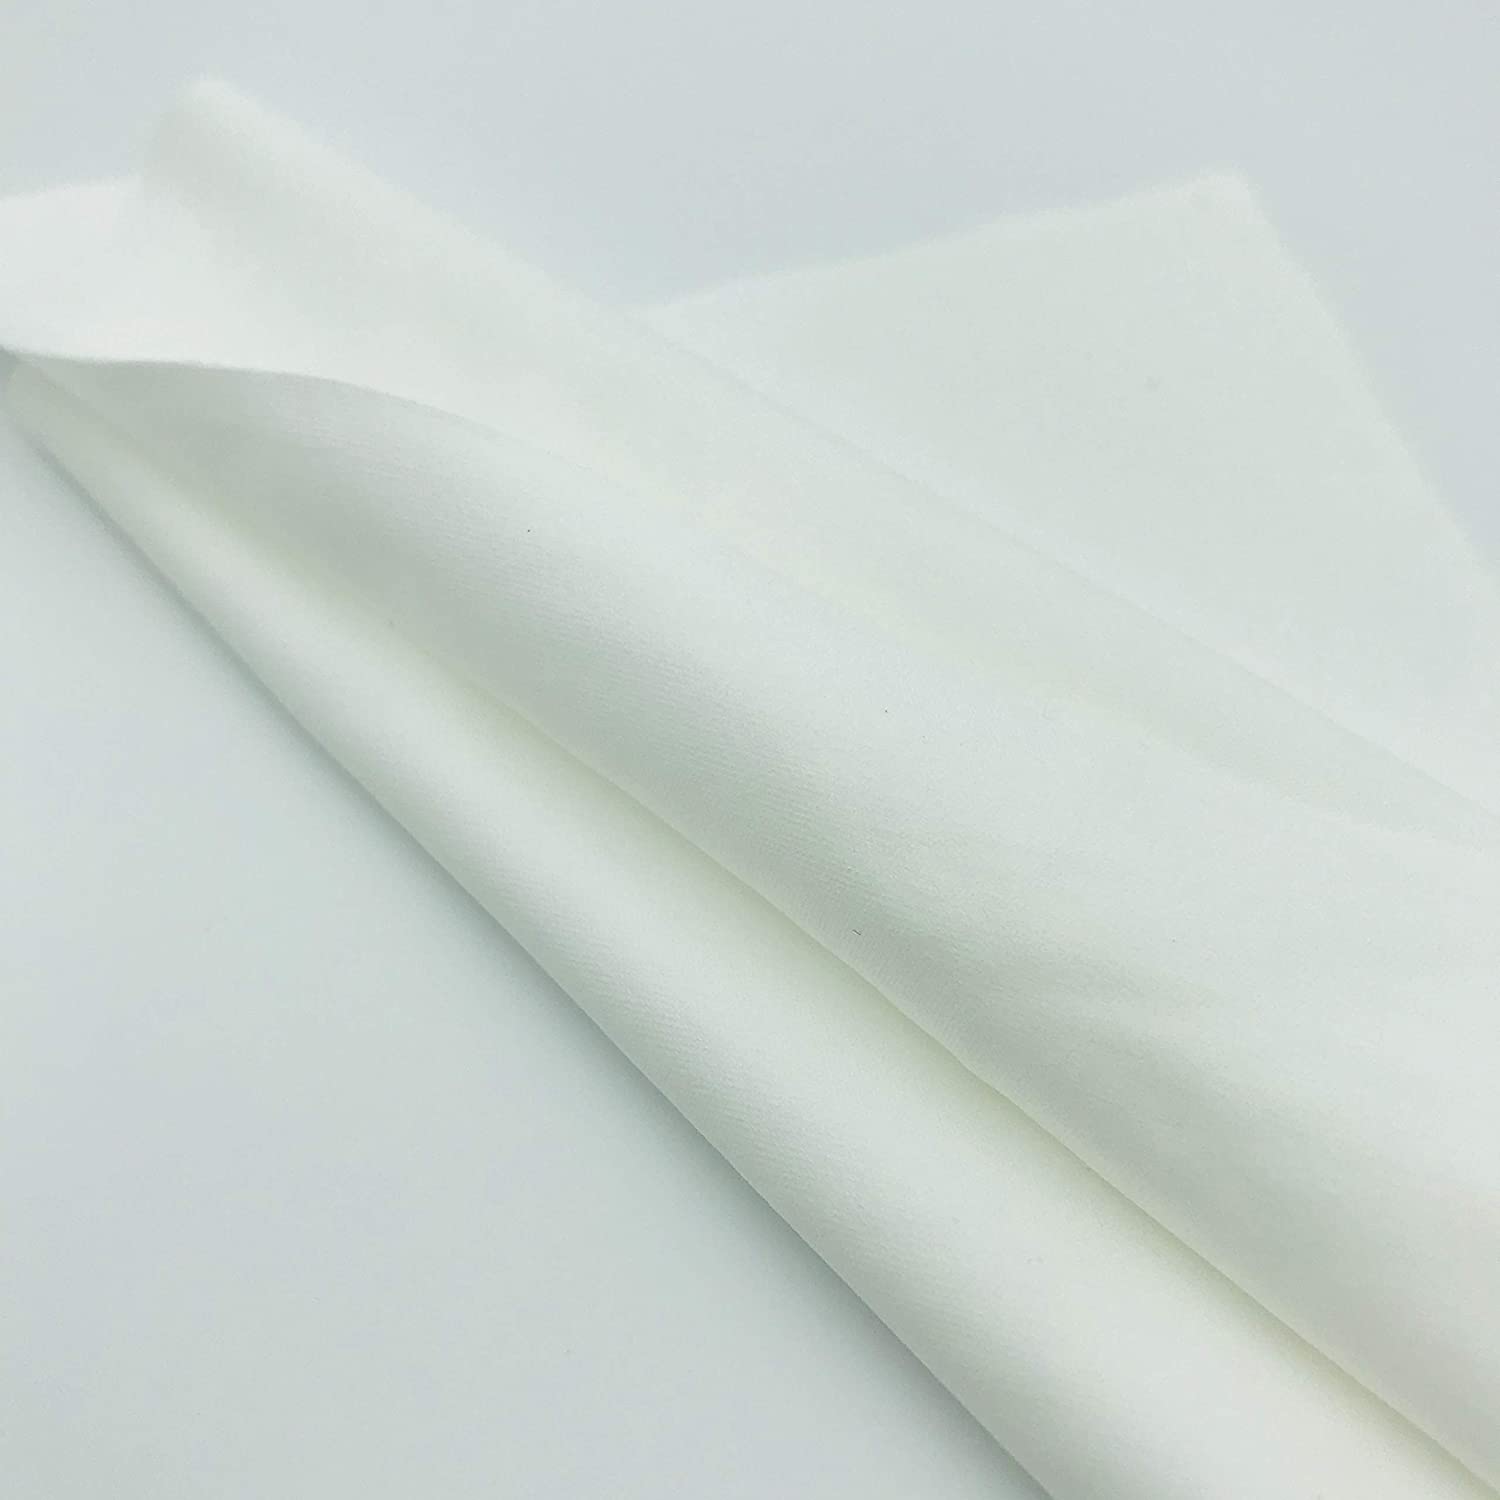 AAwipes Cleanroom Wipers: 9"x9" Double Knit, 100% Polyester, Class10-100. 2,100 wipes/box, 14 bags (No. CP14009). Note: New box design, 14 not 12 bags.